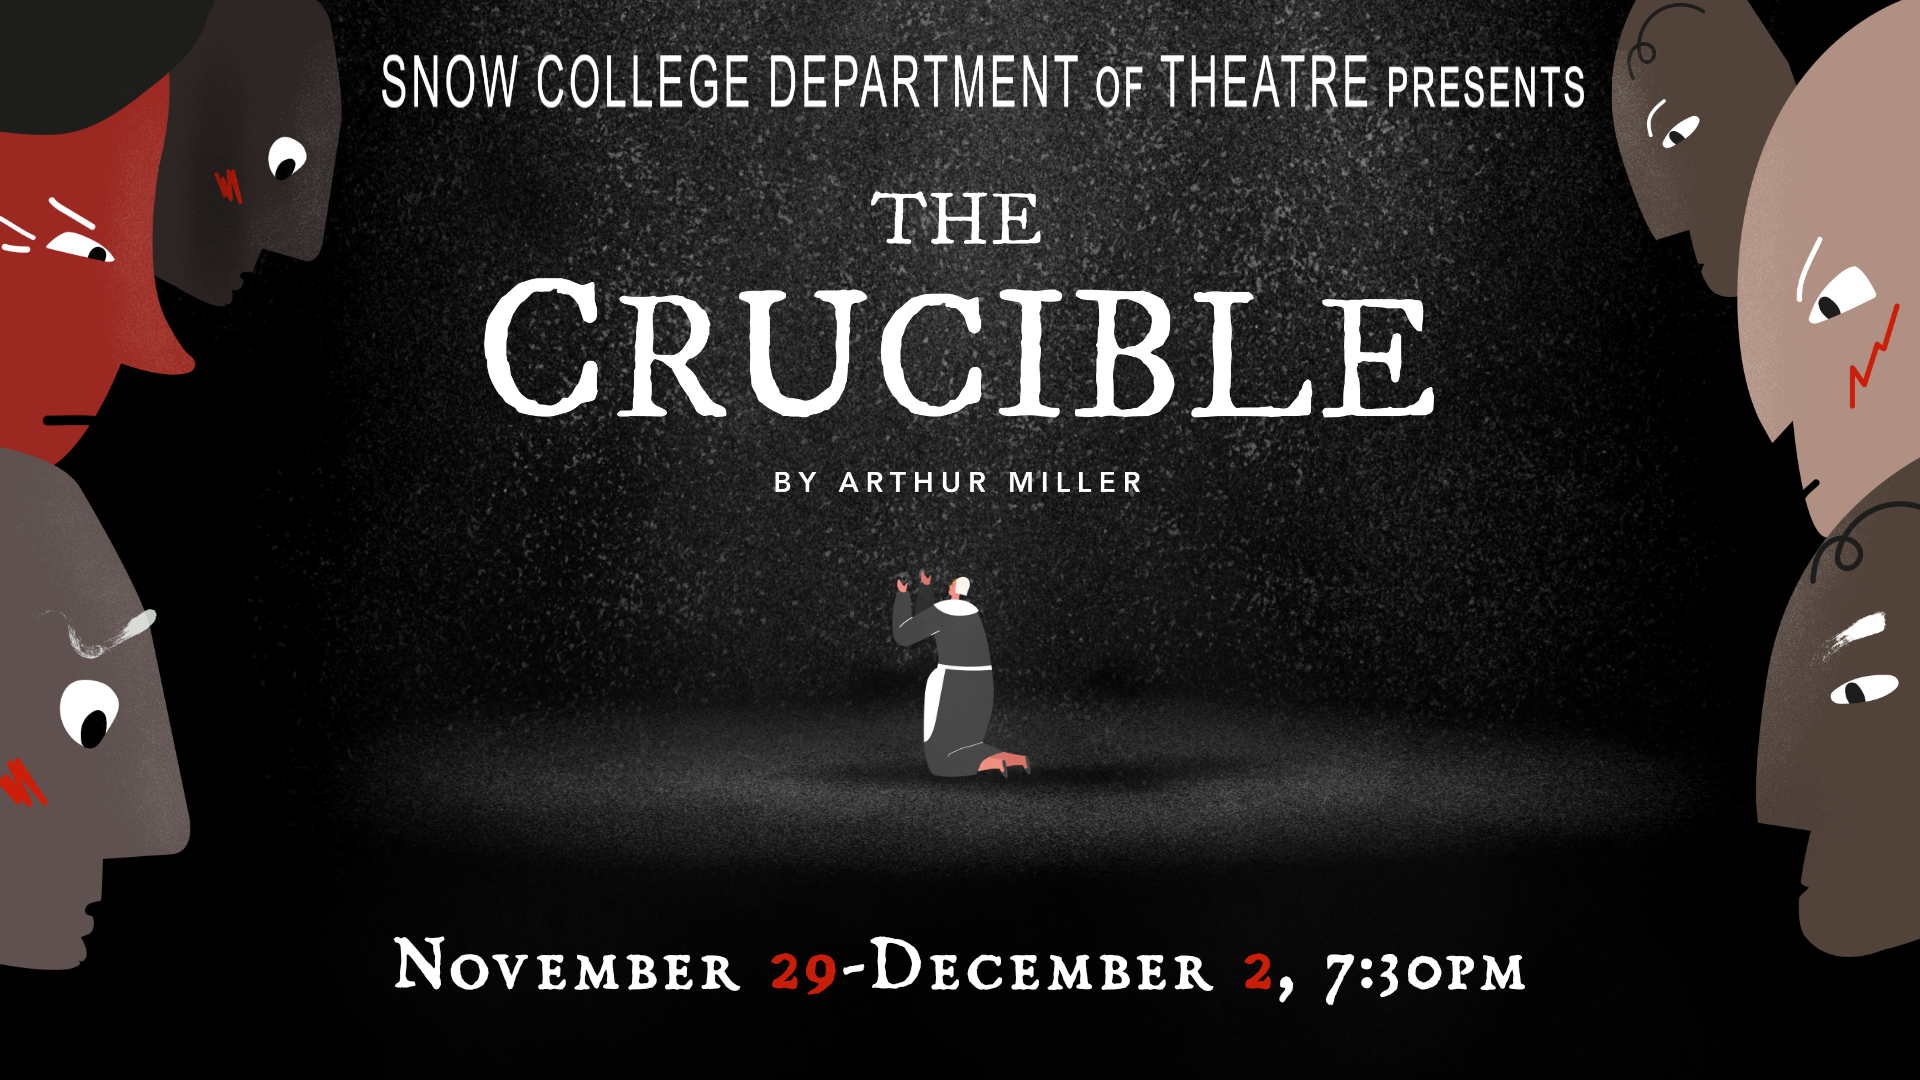 Snow College Department of Theatre presents The Crucible by arthur Miller NOvember 29-December 2, 7:30pm